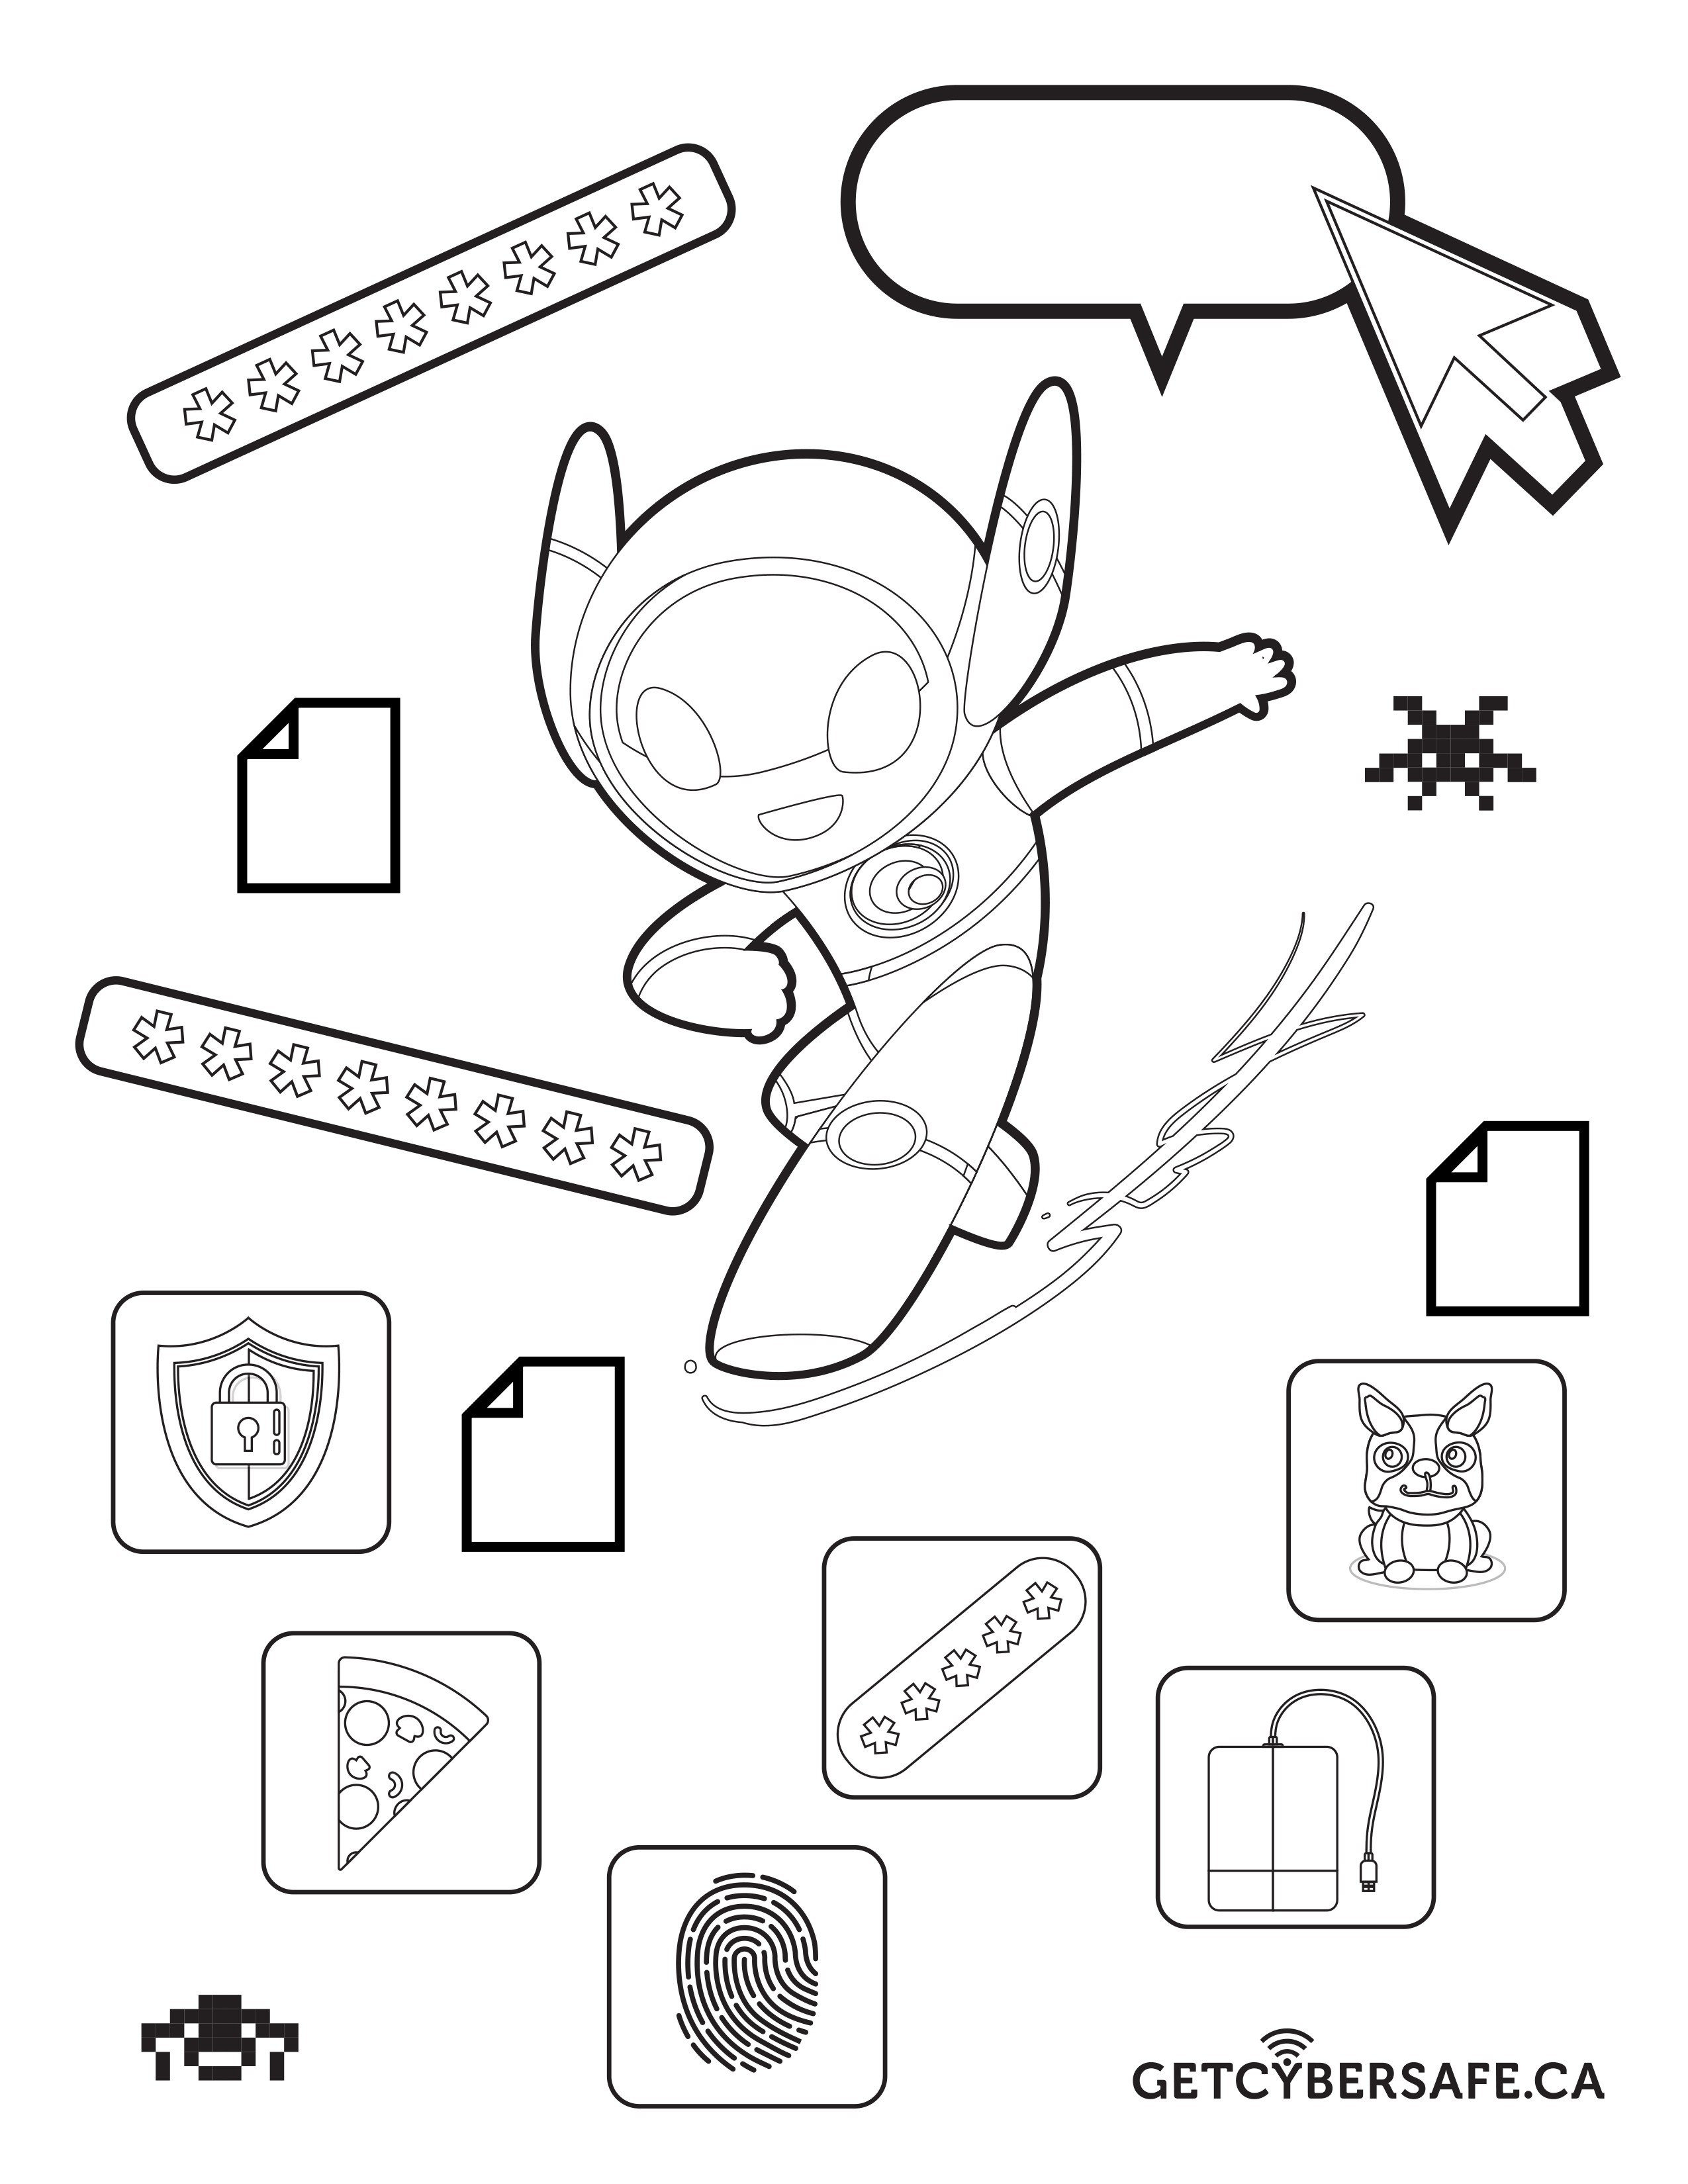 black and white image of cybot, password fields, a dialogue bubble, an anti-virus symbol, a pizza slice, a thumbprint, a hard drive, a puppy